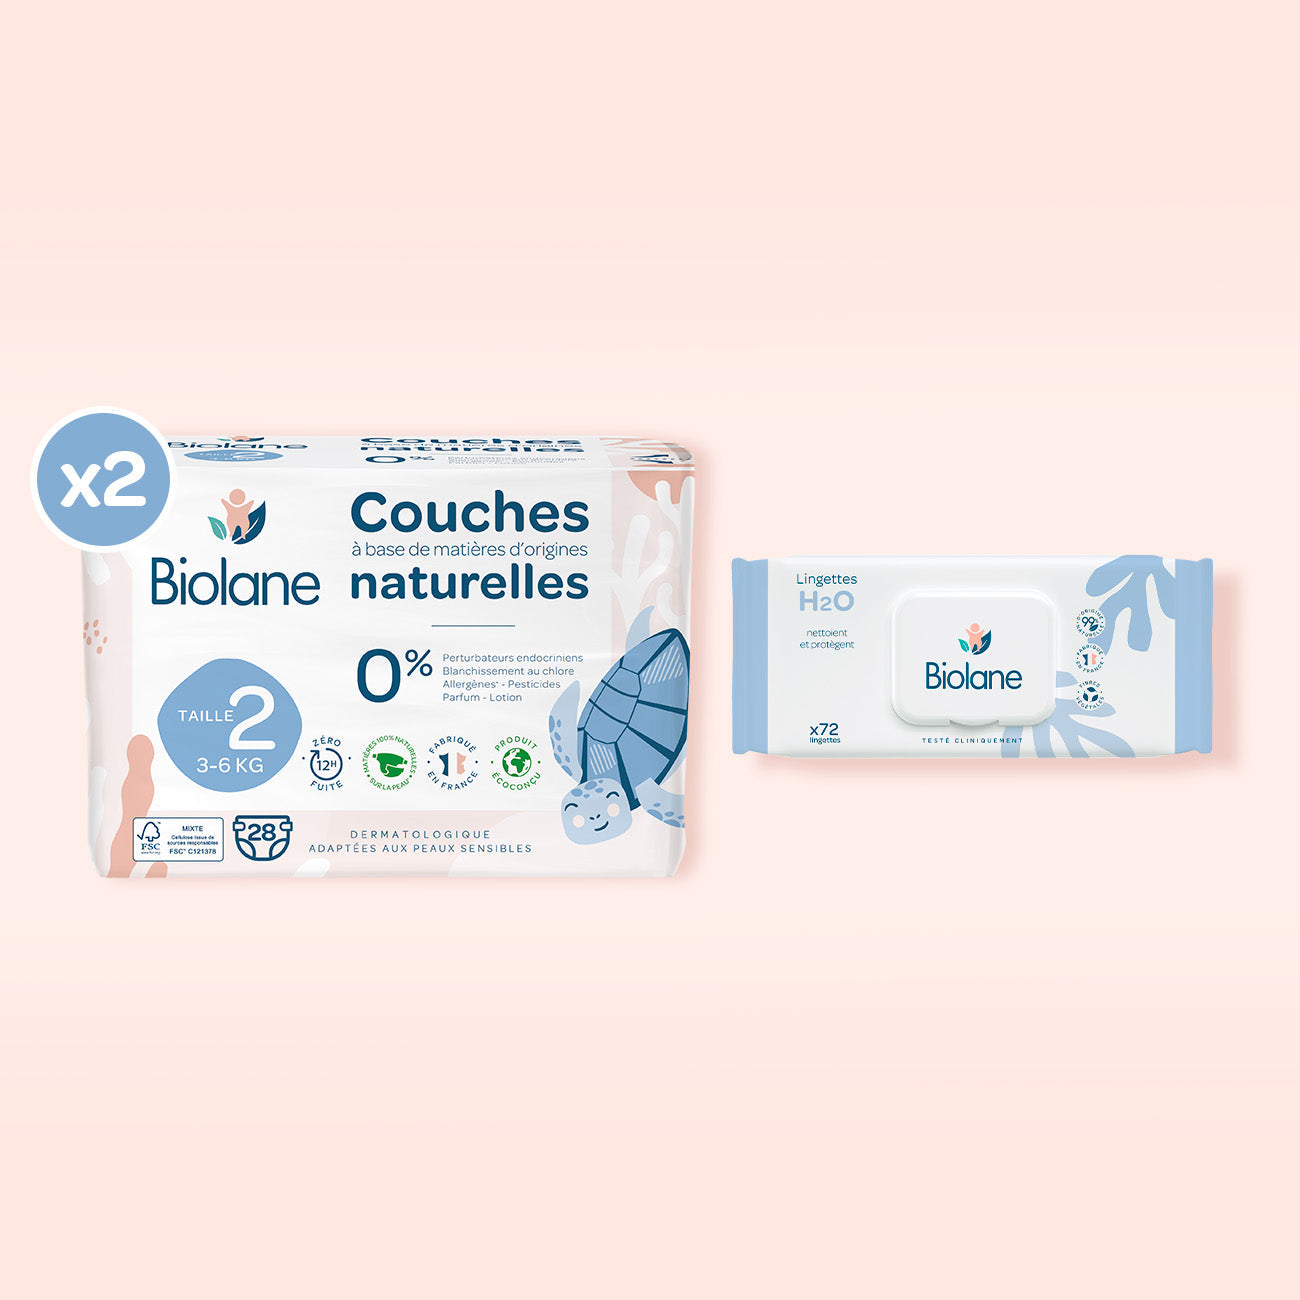 Get trendy with Kit découverte - Biolane - Couches available at BABY PREMA. Grab yours for €17.90 today!